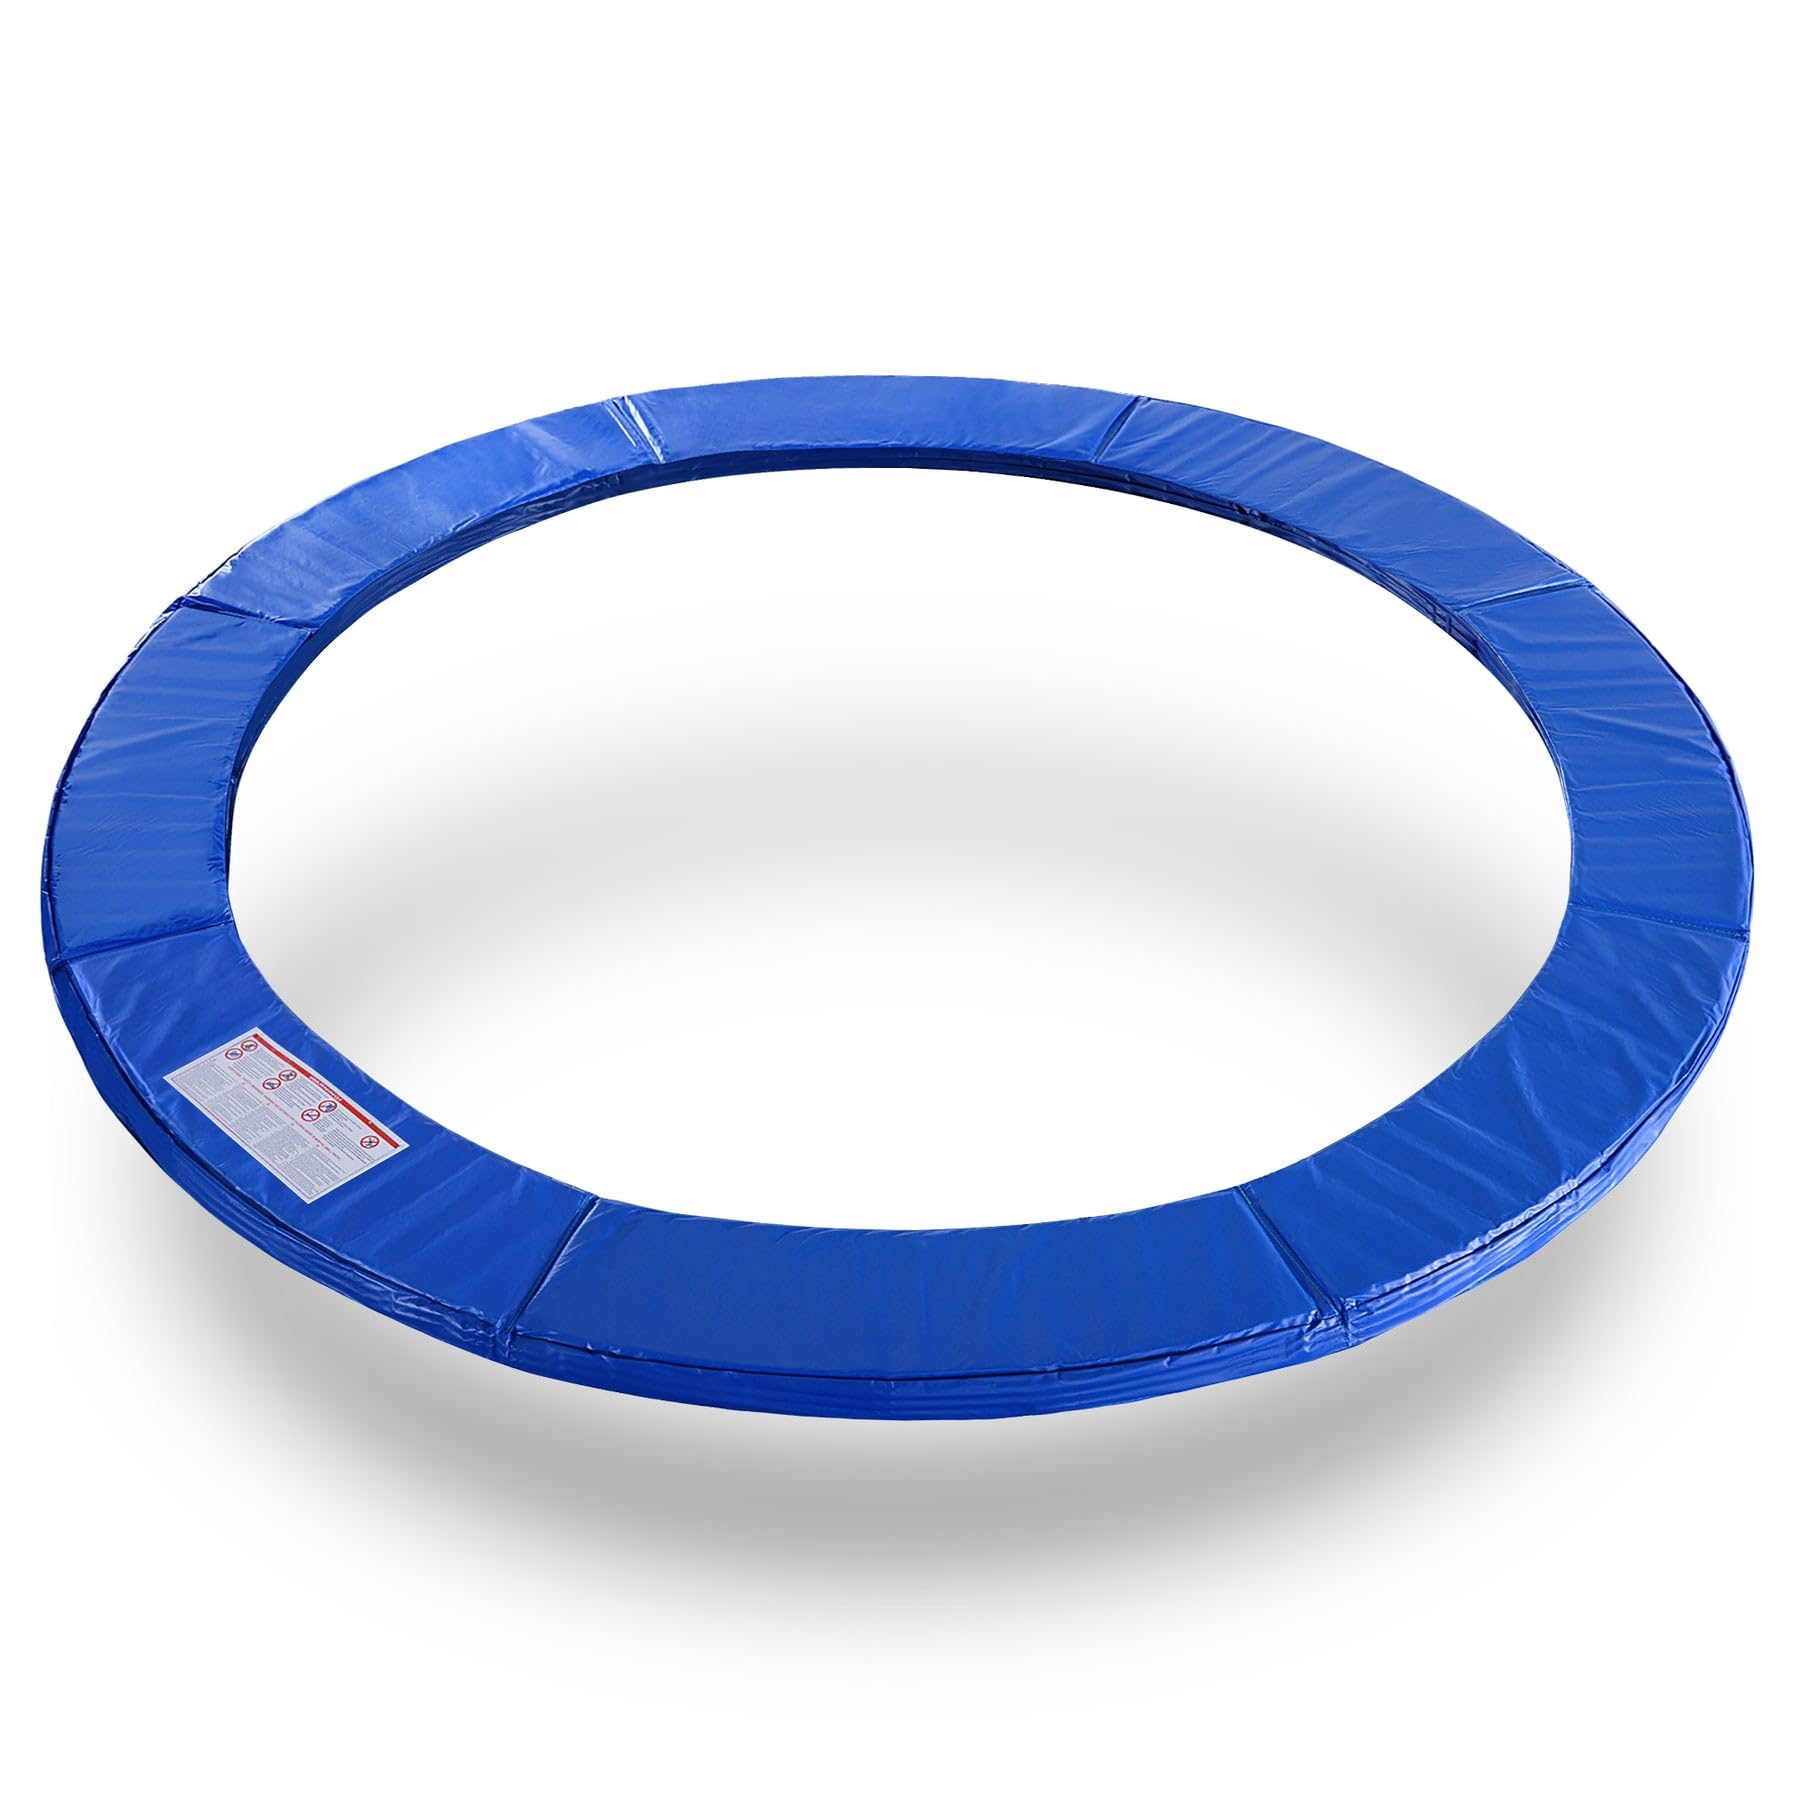 Exacme Trampoline Pad Replacement Round Safety Spring Cover, No Hole for Pole (Blue, 8 Foot)